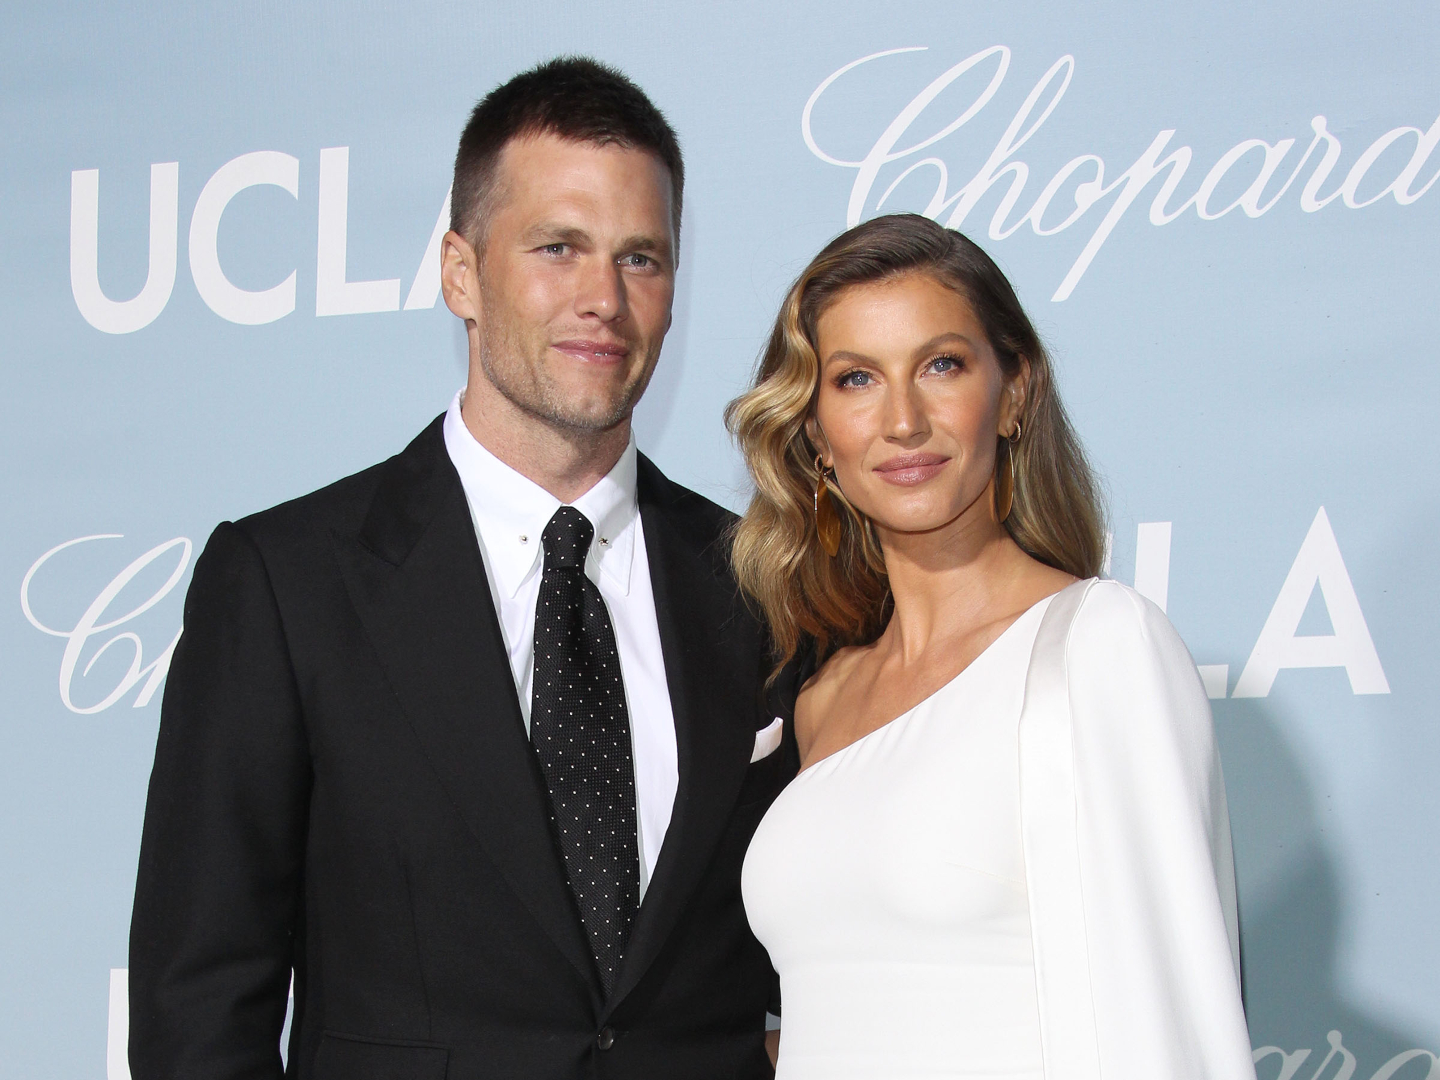 gisele-bundchen-shows-support-for-tom-brady-amid-rumored-marriage-trouble